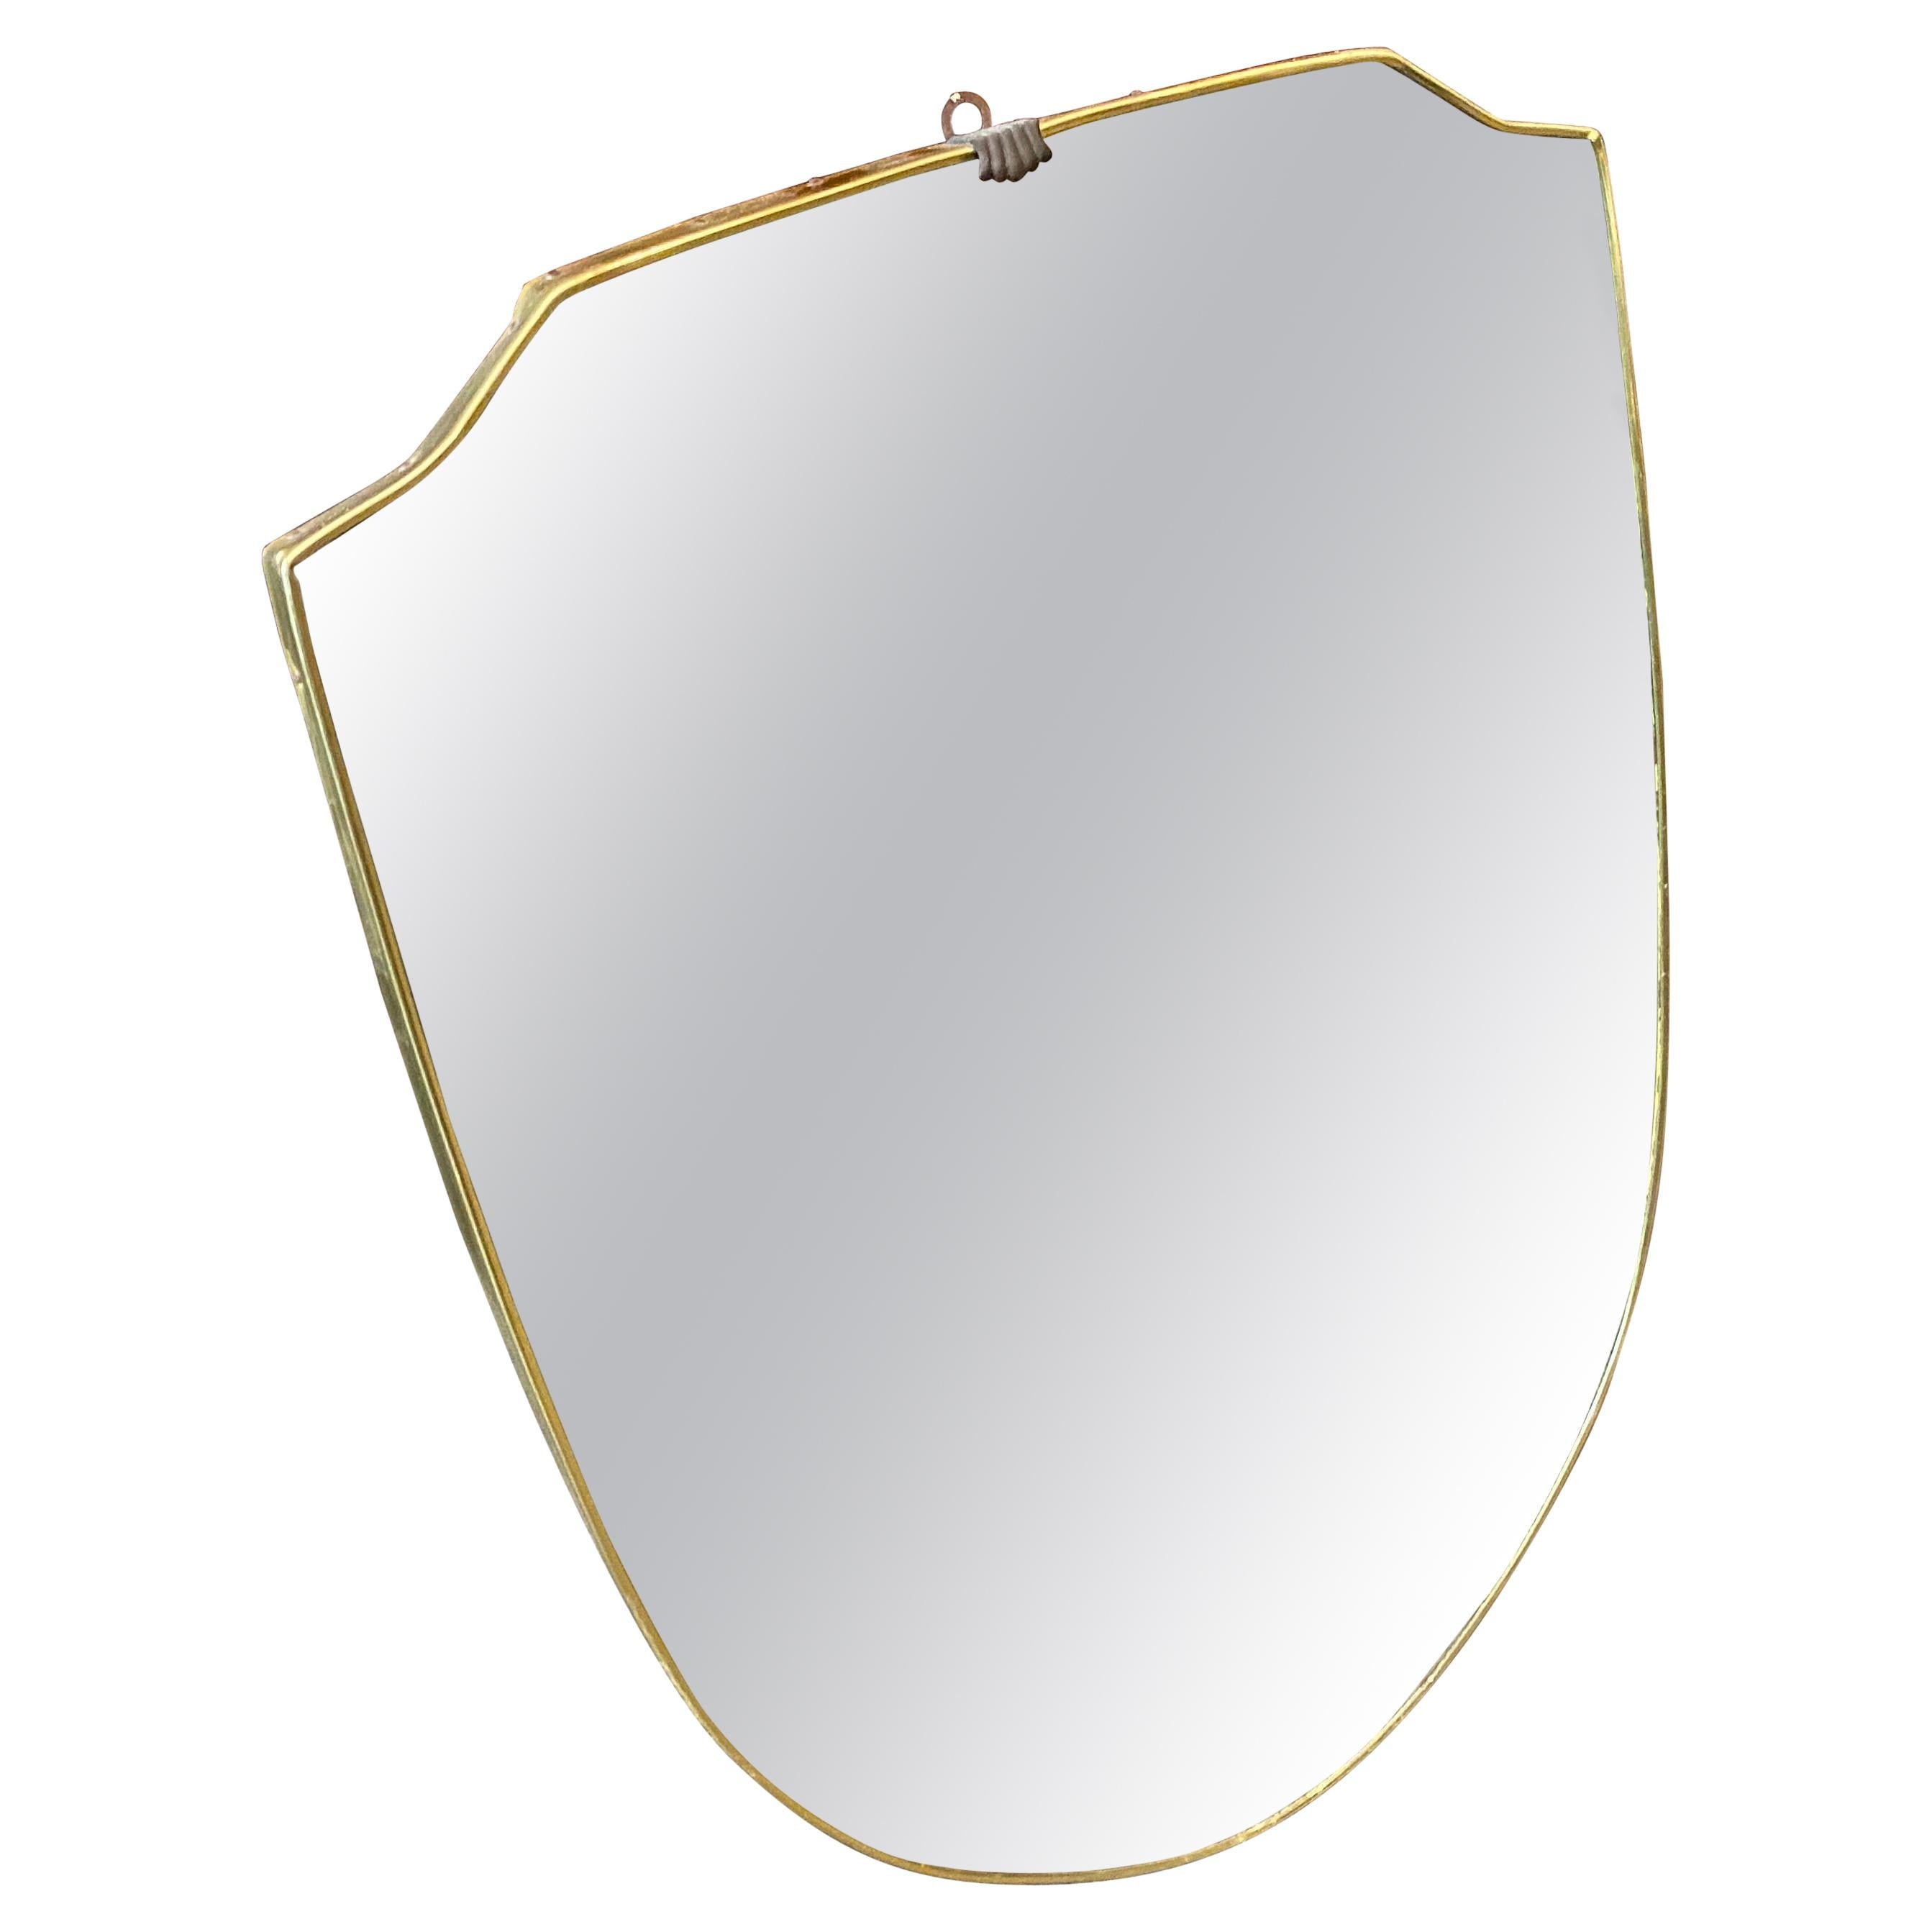 1960s Mid-Century Modern Brass Italian Wall Mirror in the Manner of Giò Ponti